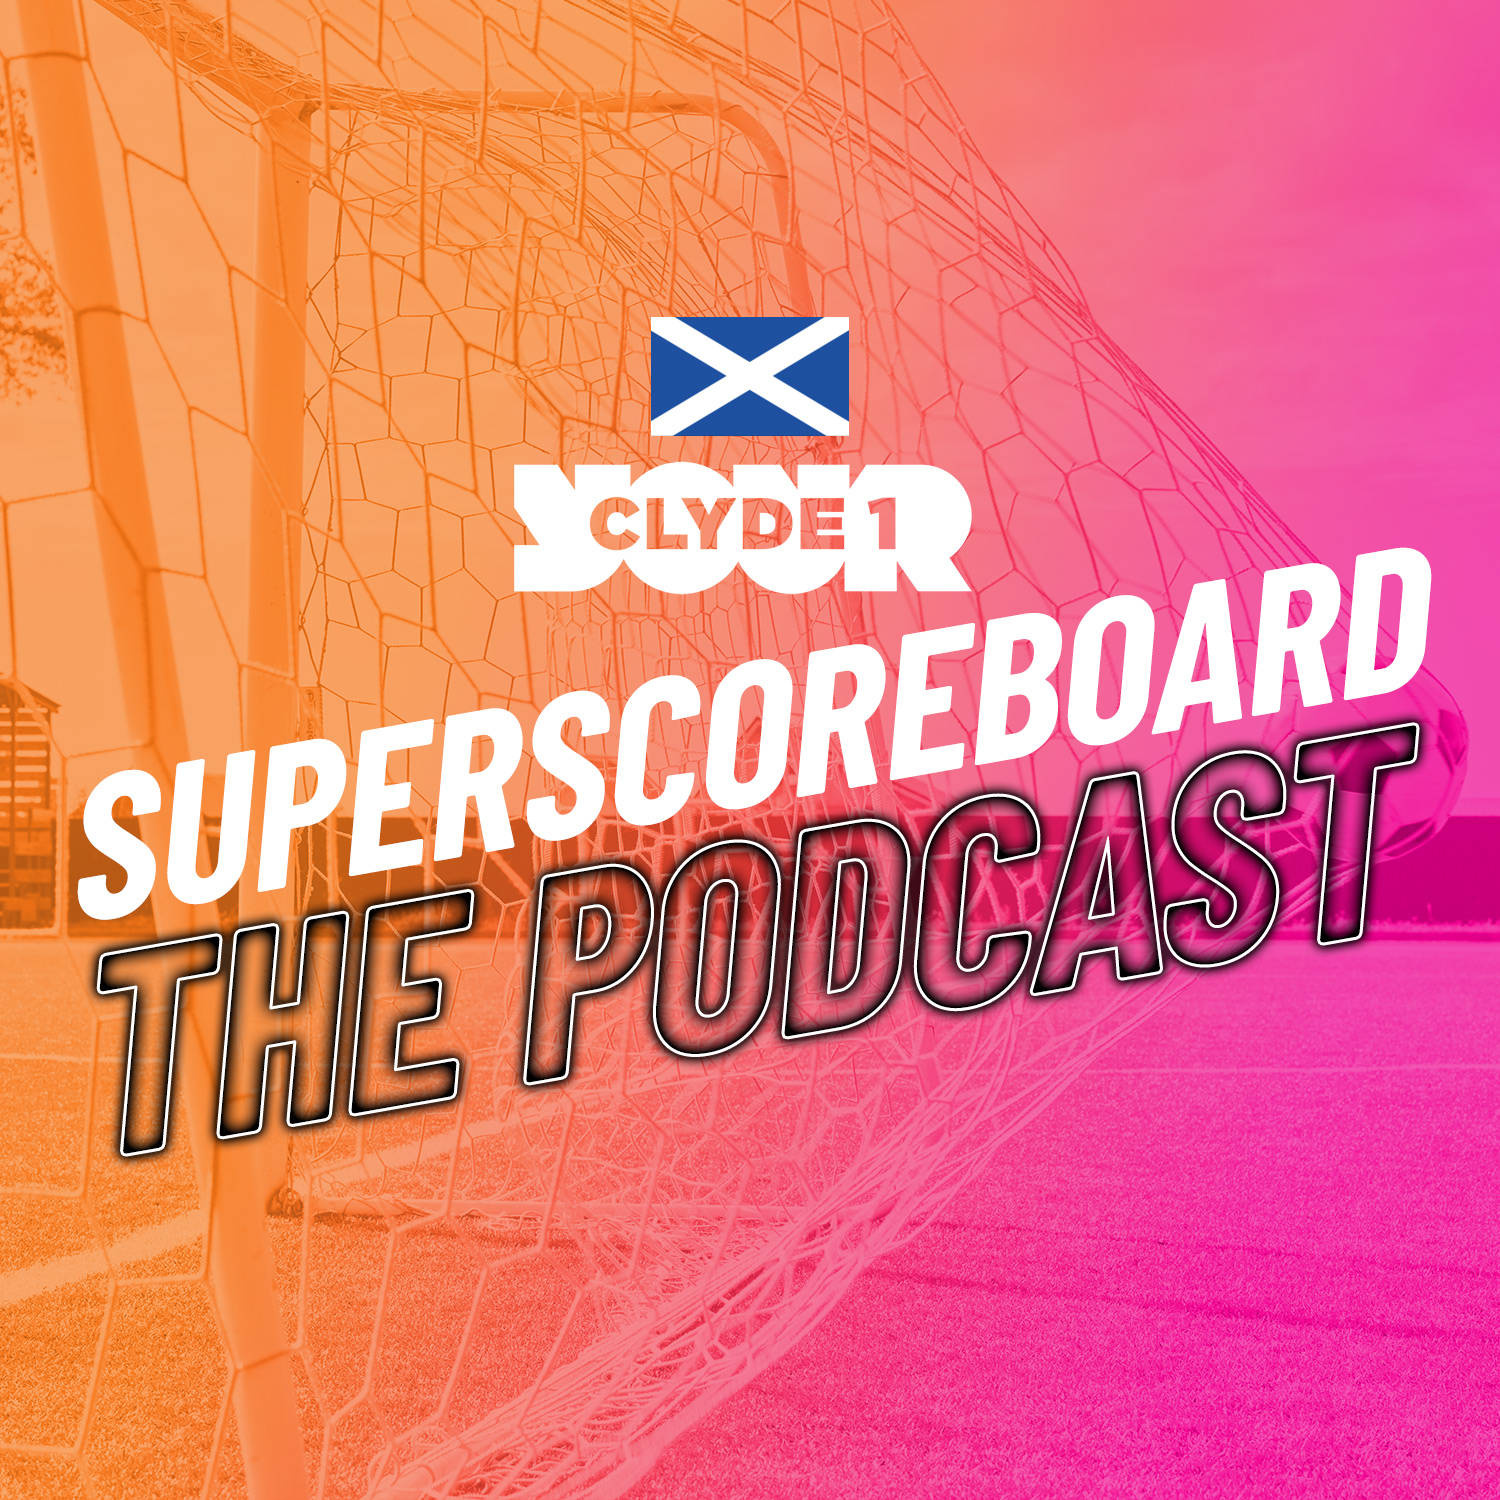 Wednesday 7th February Clyde 1 Superscoreboard